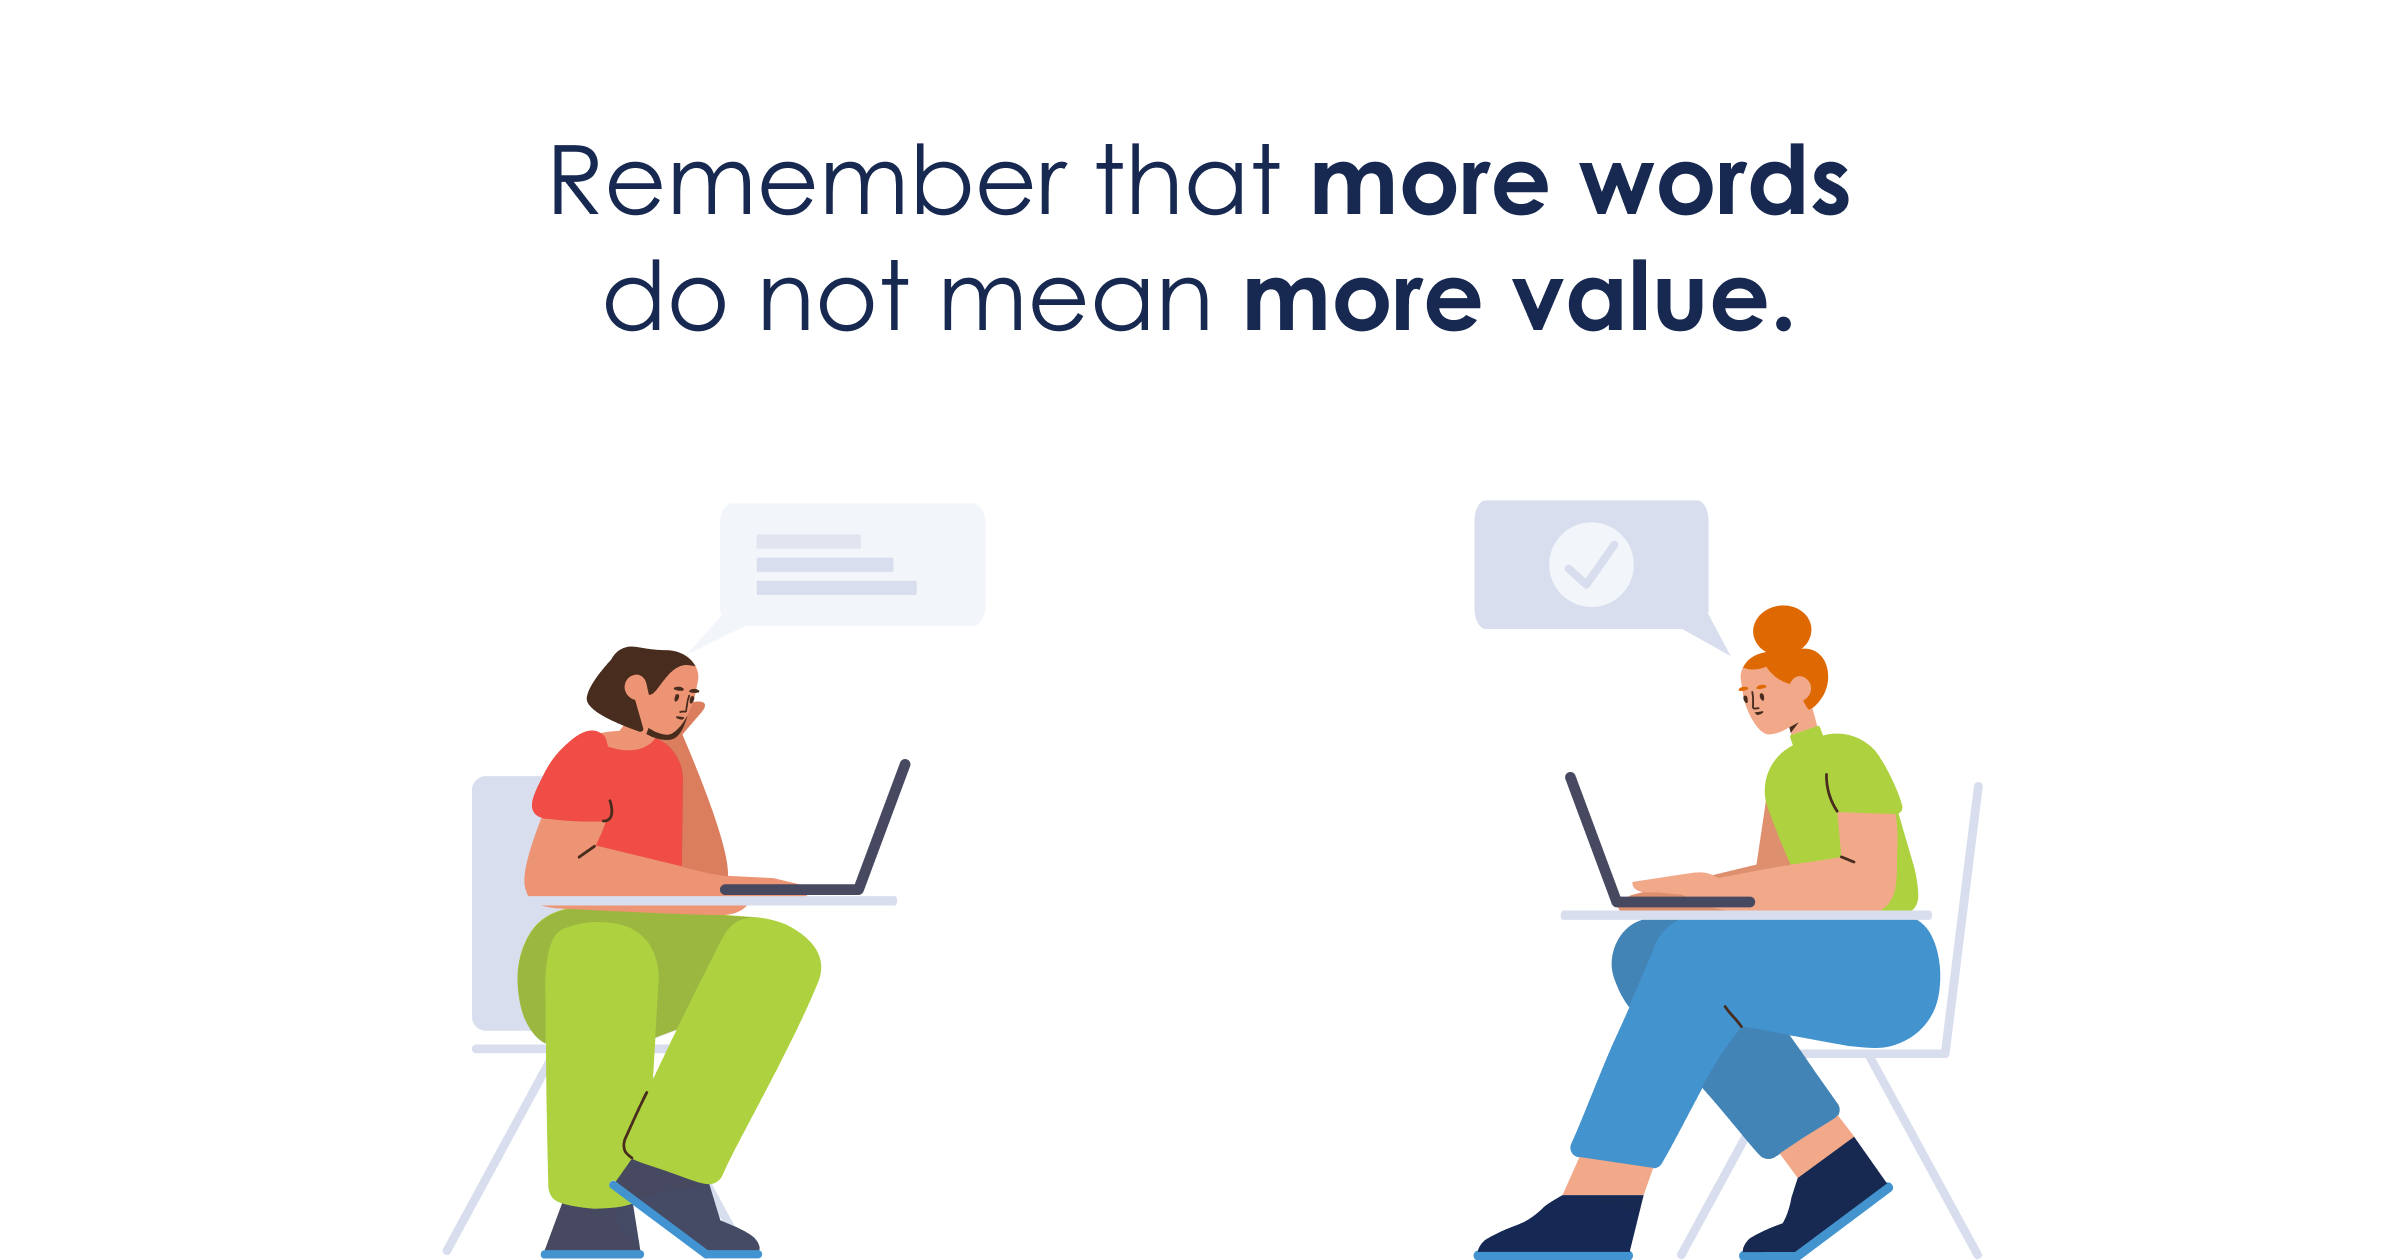 Remember that more words do not mean more value